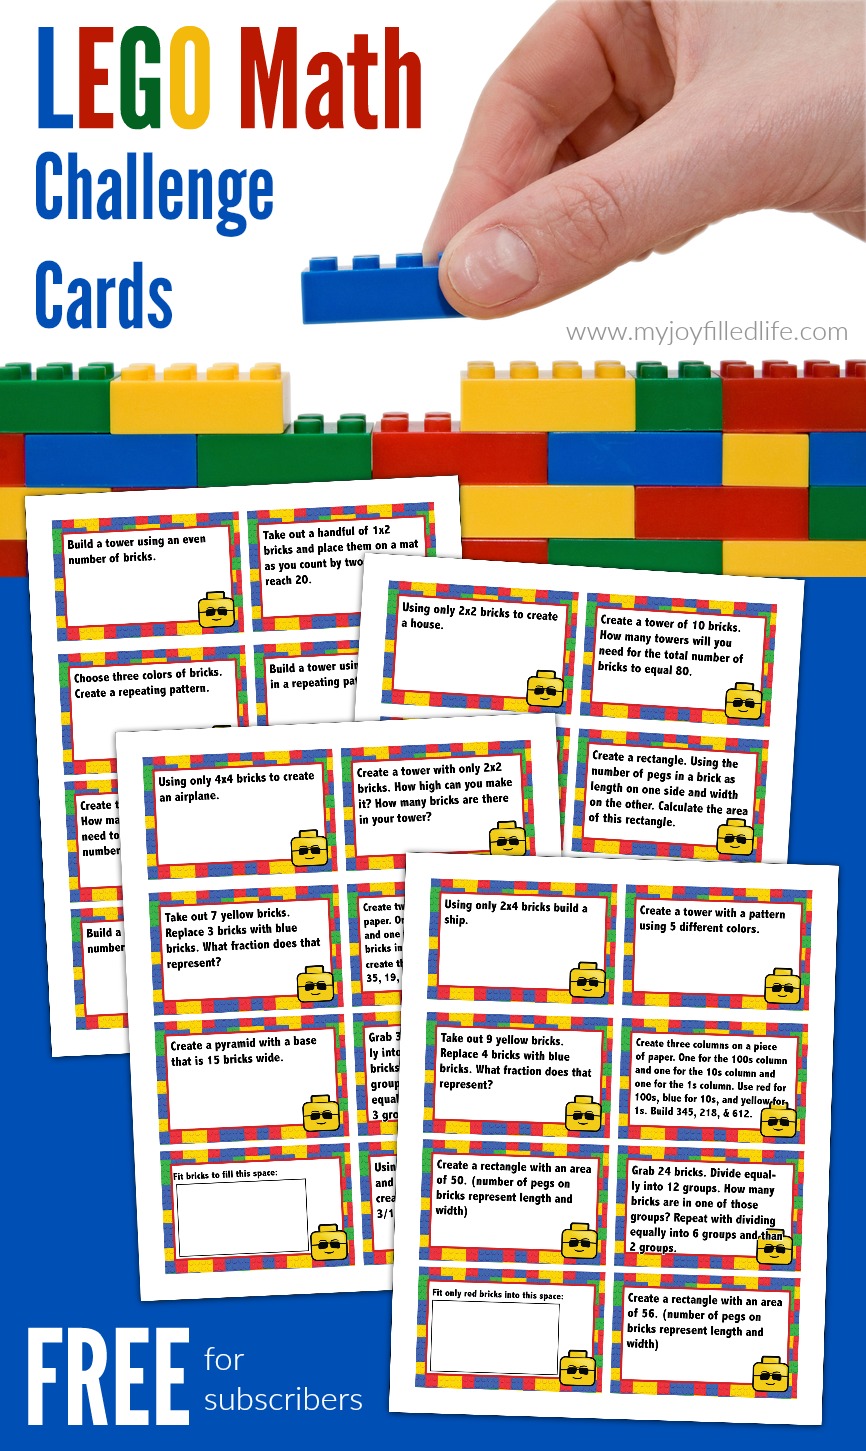 Here is a fun way to combine Legos and math.  These Lego math challenge cards will help make math more fun and memorable for your kids. #lego #math #freeprintable #homeschoolprintable #mathgames #mathchallenge #legomath